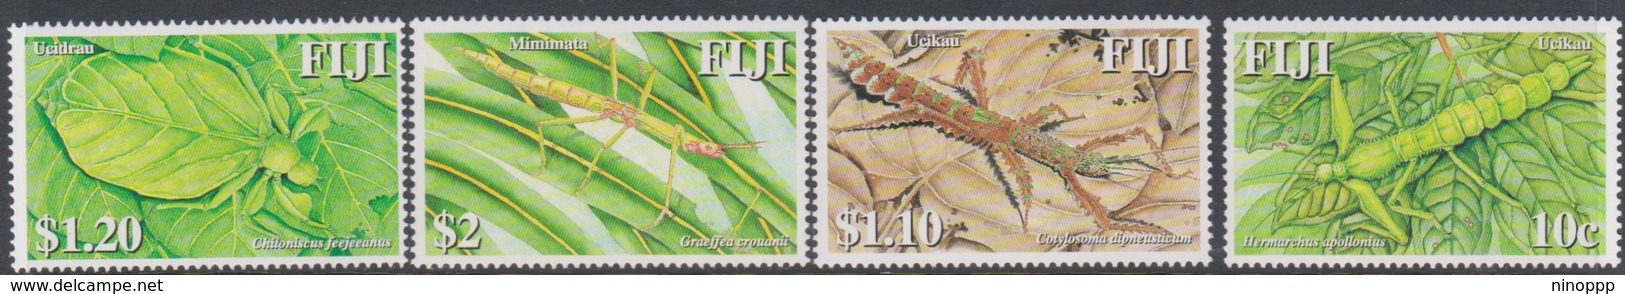 Fiji SG 1330-1333 2006 Stick Insects, Mint Never Hinged - Fiji (1970-...)